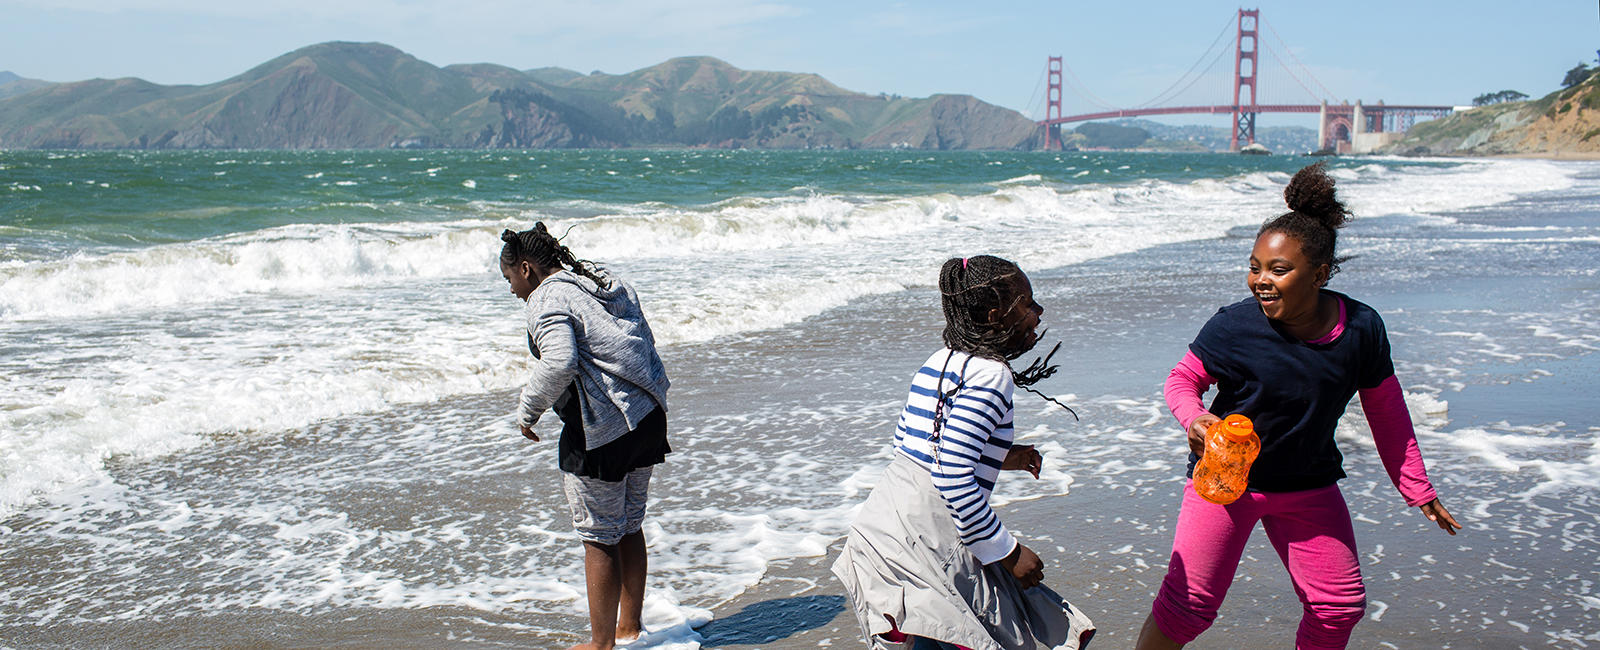 Baker Beach is a great escape right in The City.